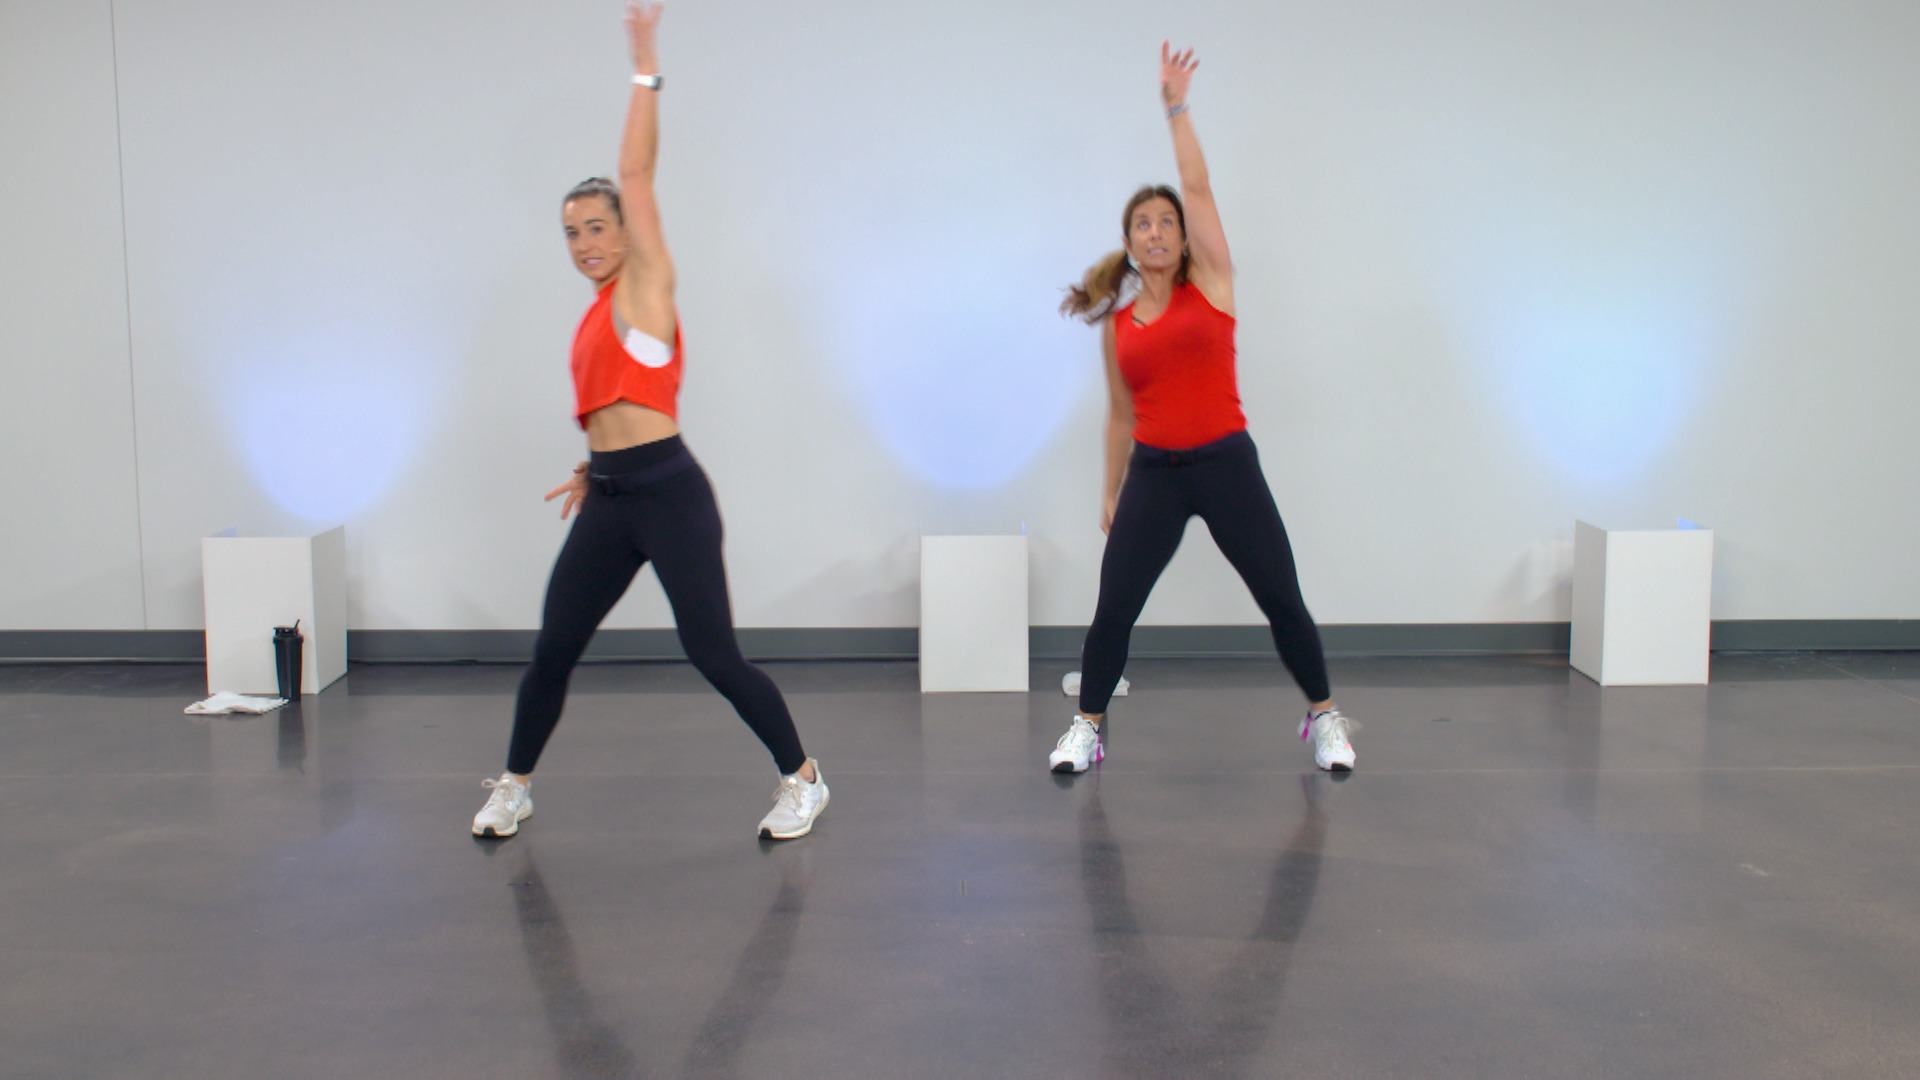 Two women wearing red tops doing a dance workout